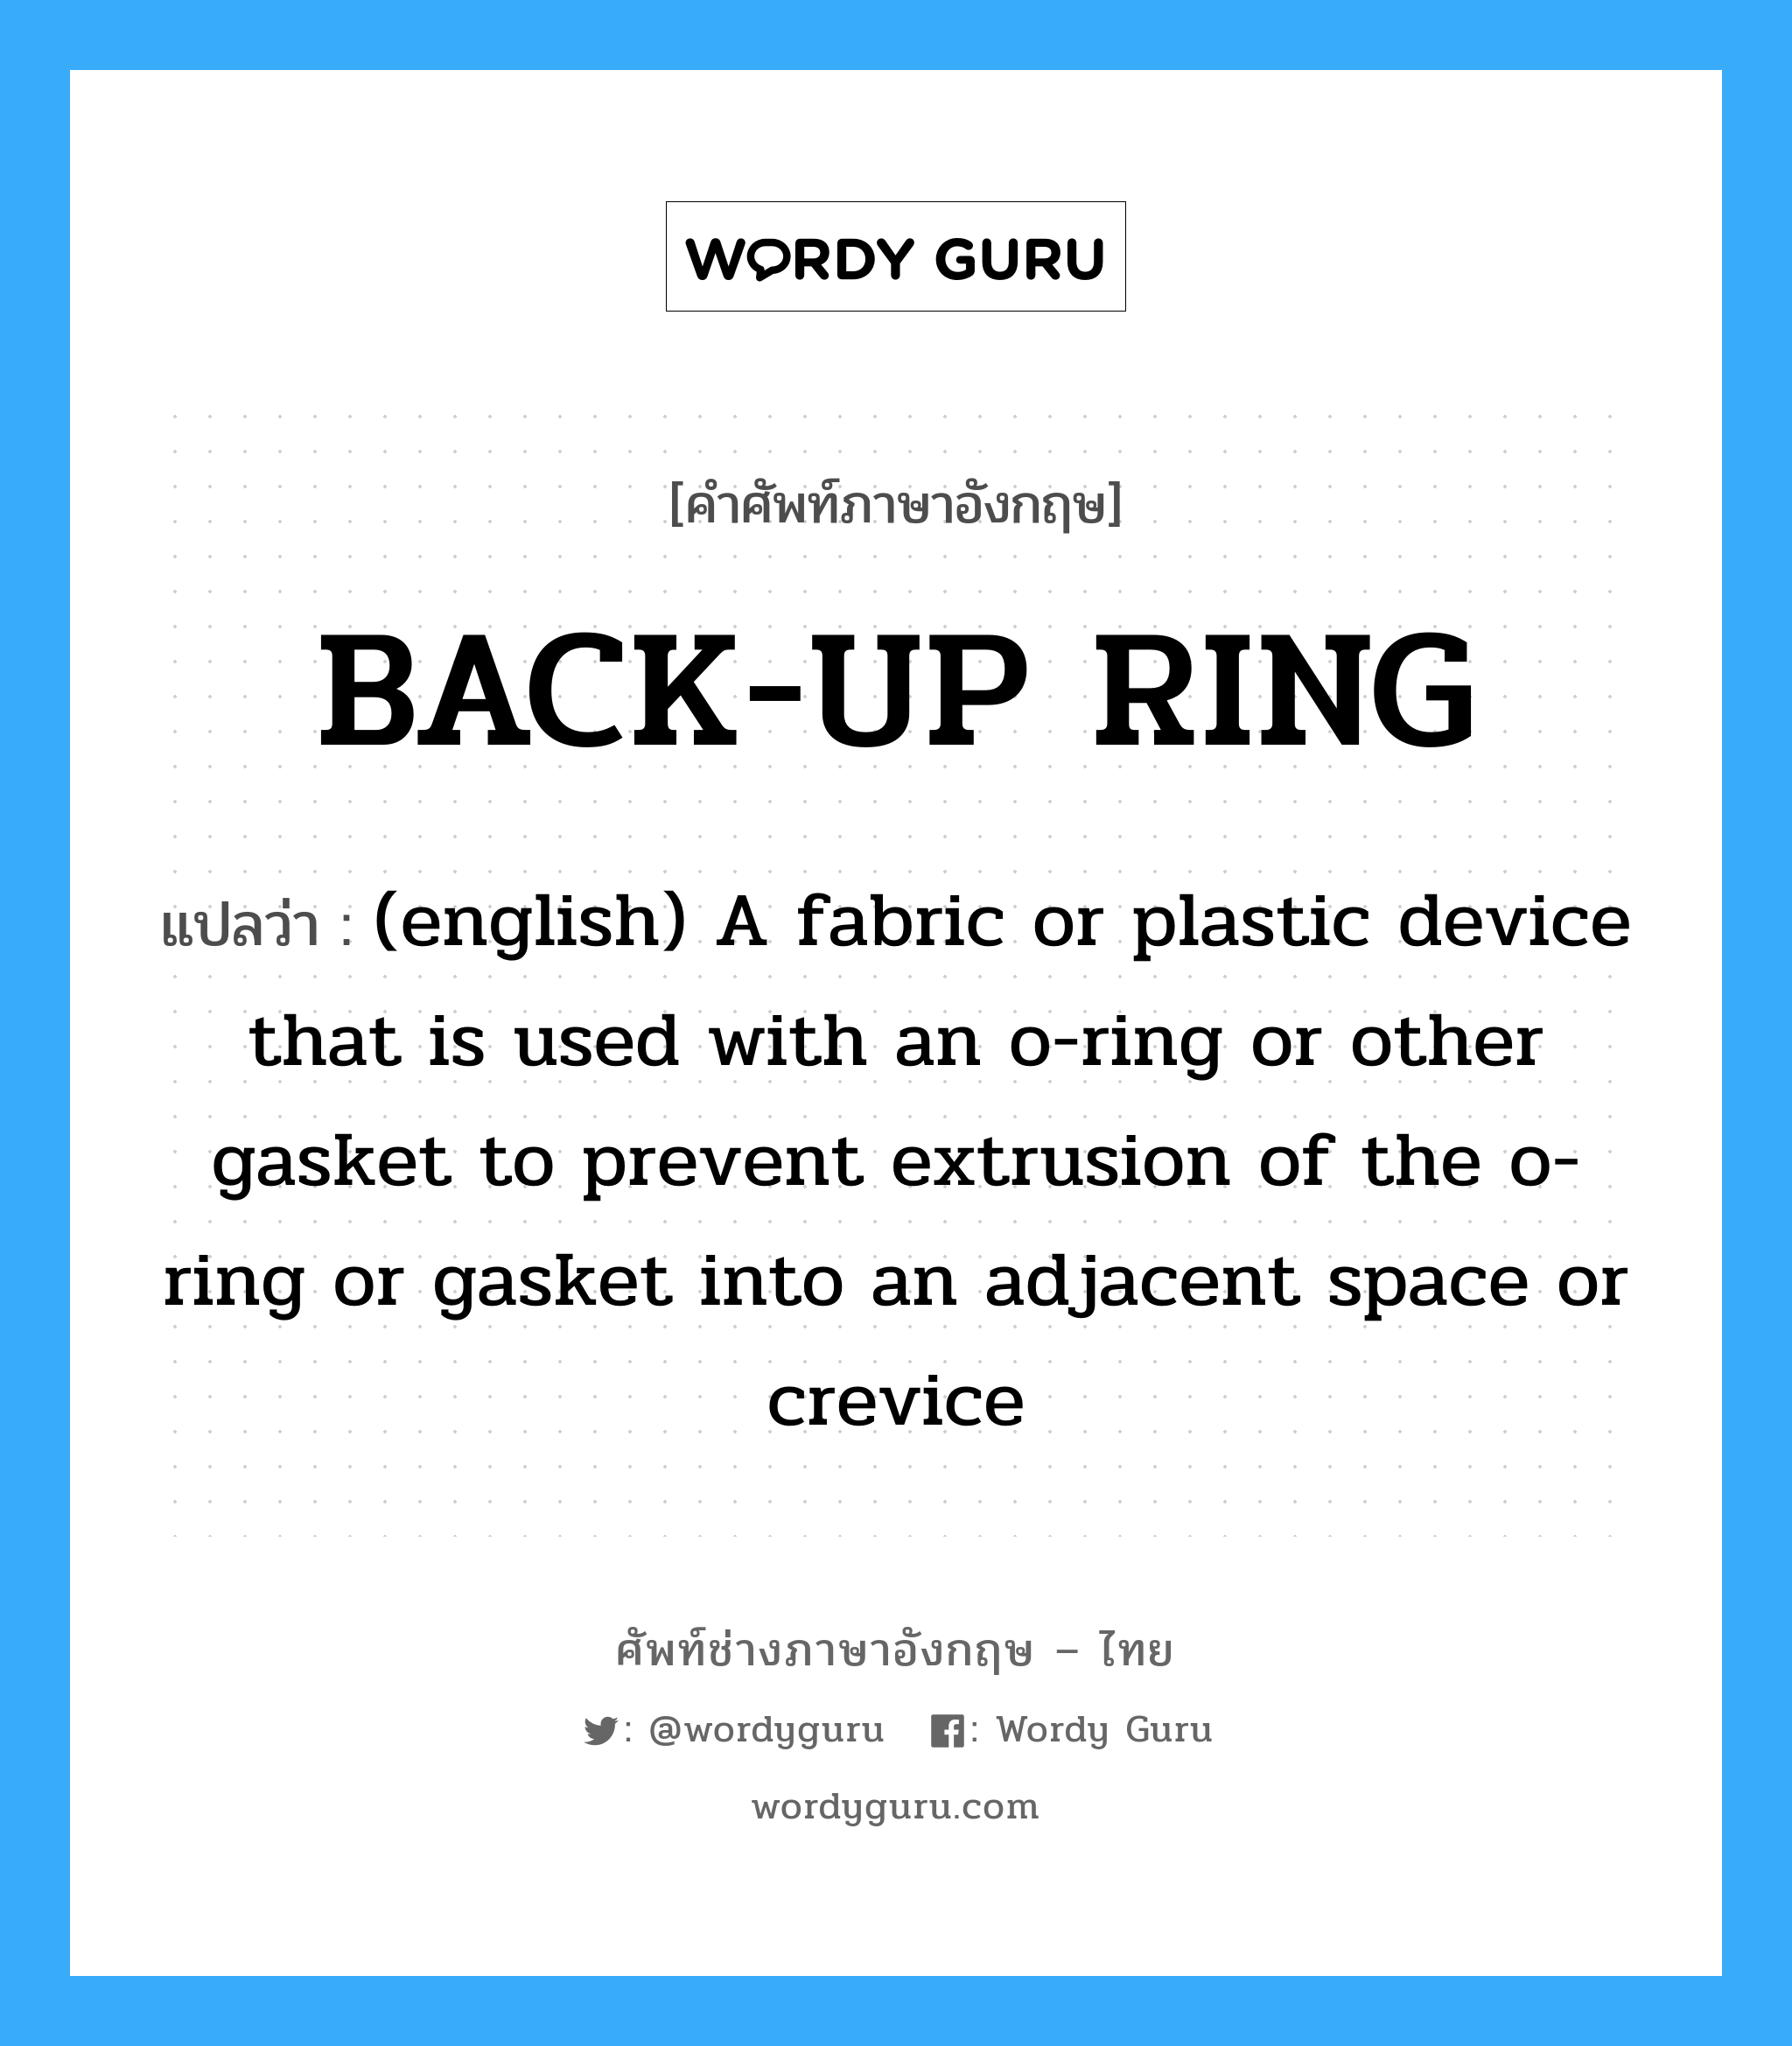 BACK-UP RING แปลว่า?, คำศัพท์ช่างภาษาอังกฤษ - ไทย BACK-UP RING คำศัพท์ภาษาอังกฤษ BACK-UP RING แปลว่า (english) A fabric or plastic device that is used with an o-ring or other gasket to prevent extrusion of the o-ring or gasket into an adjacent space or crevice